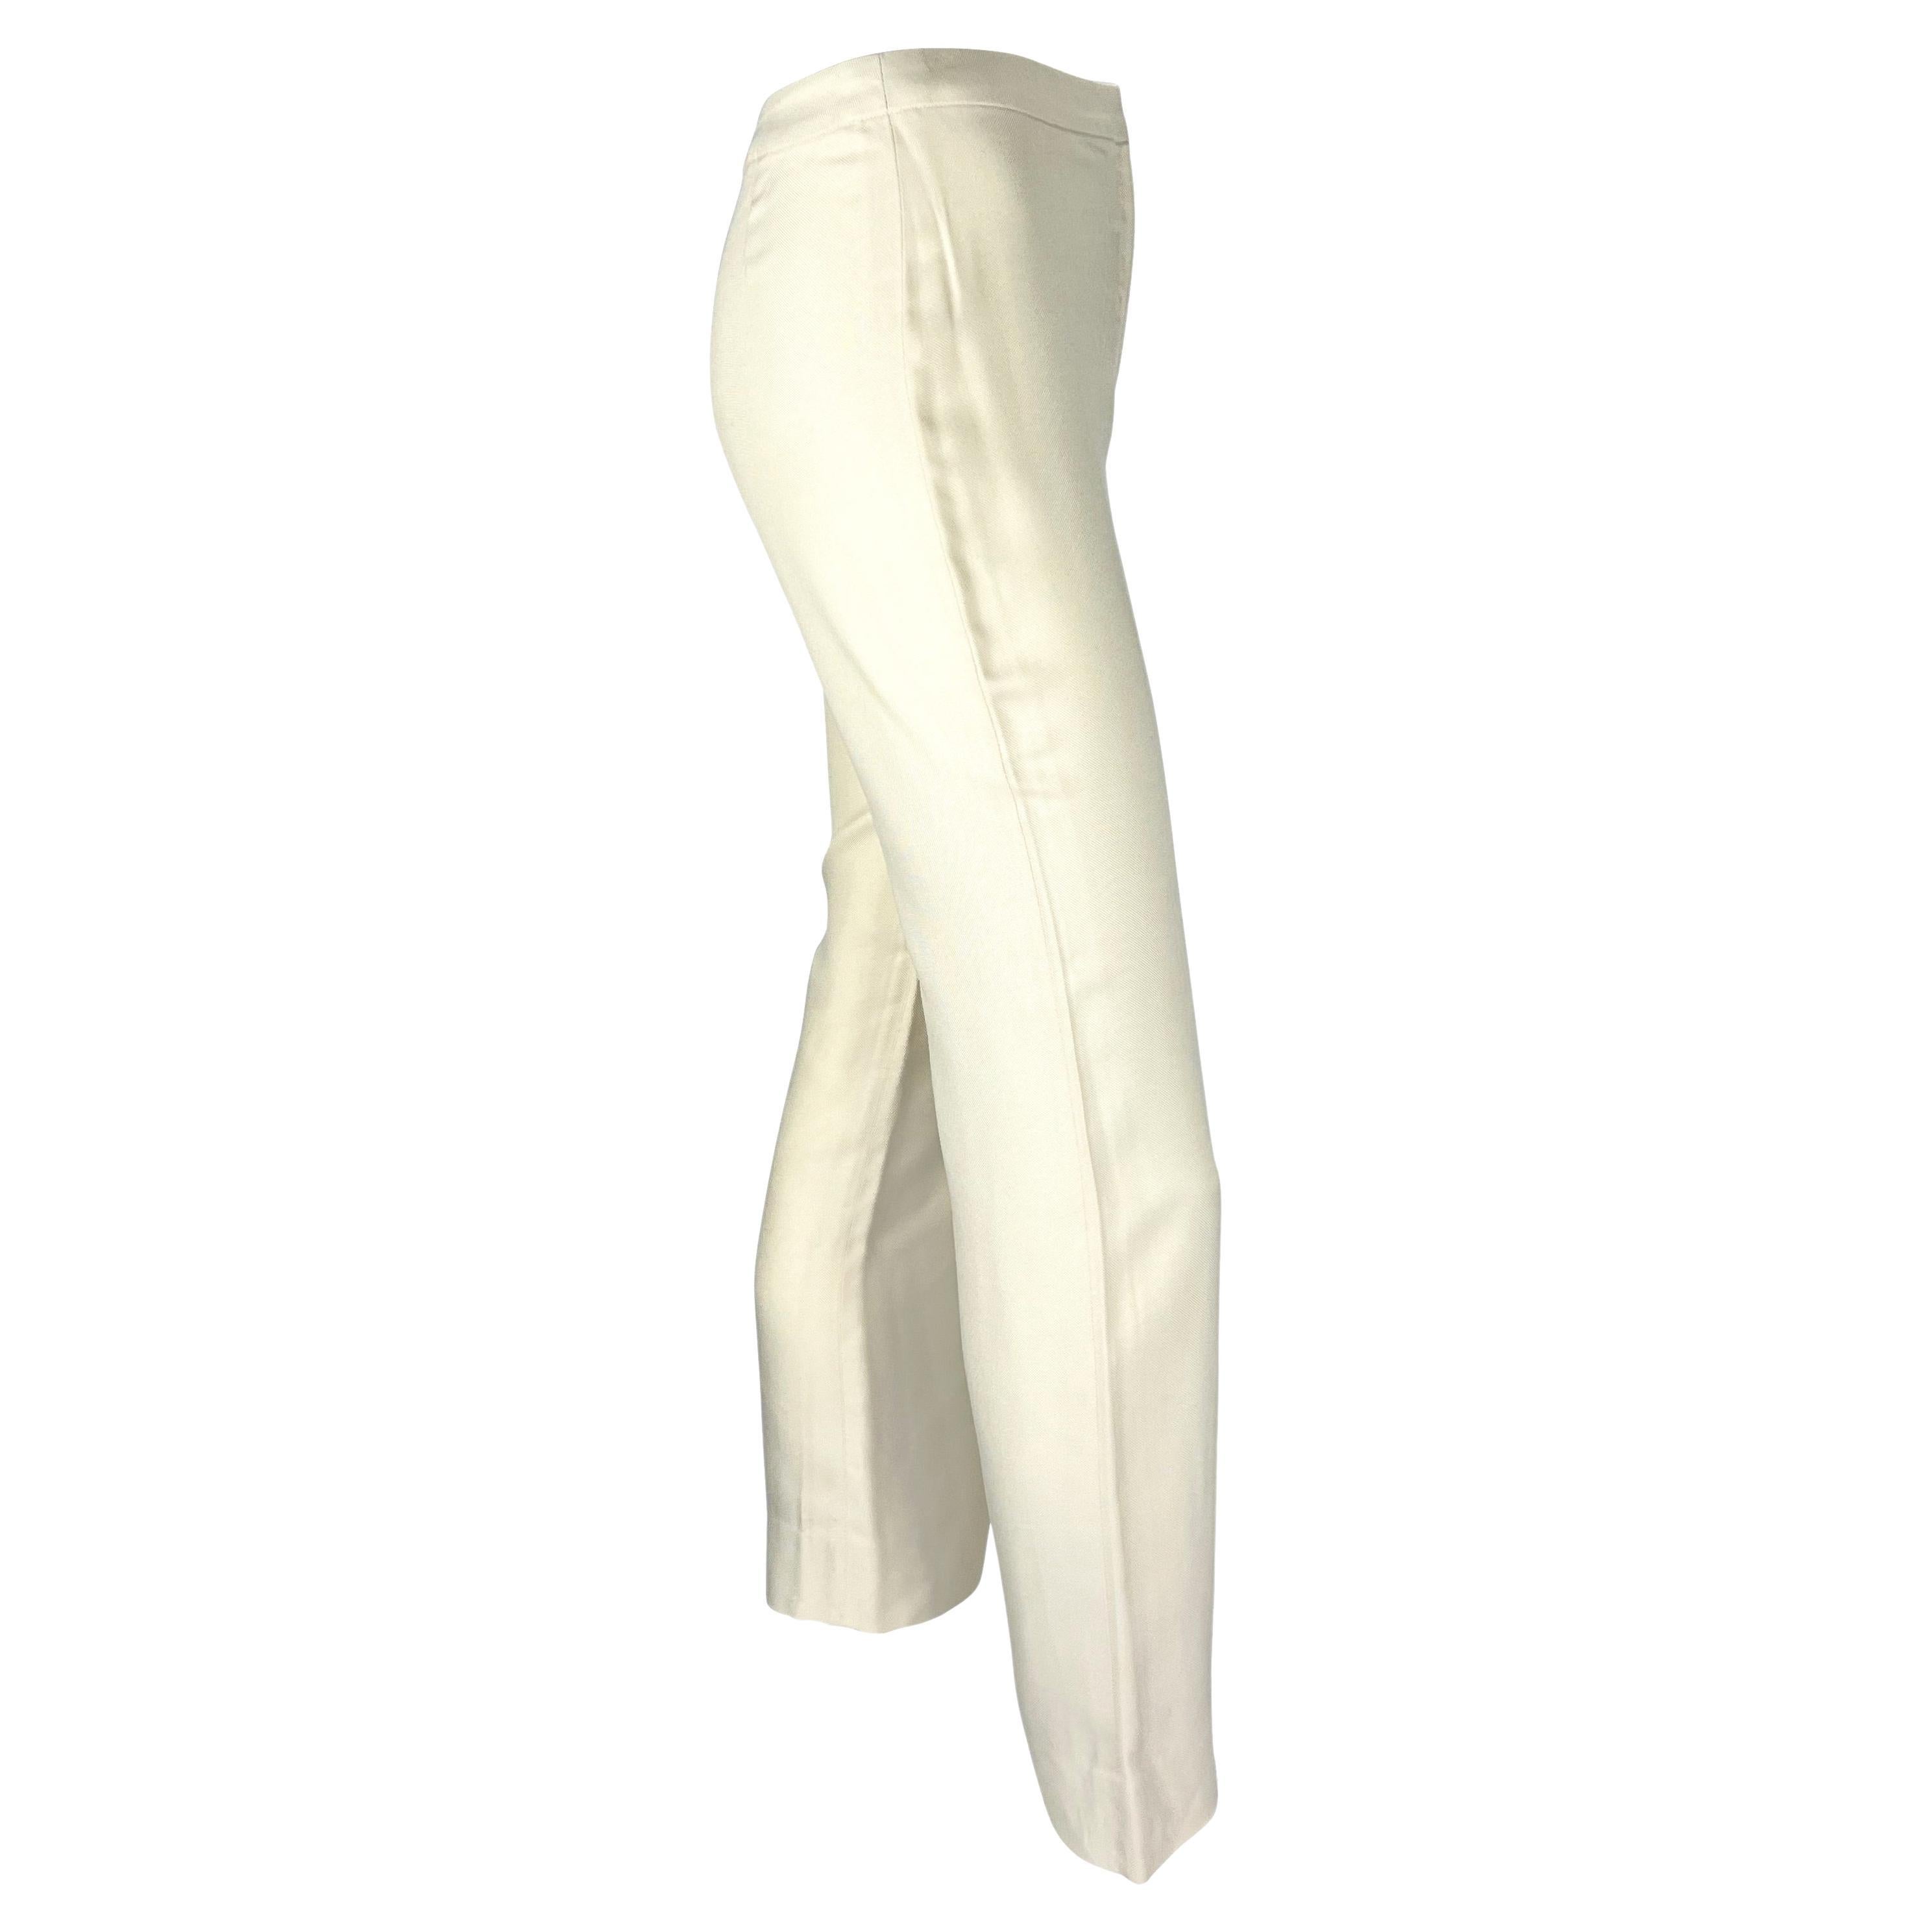 Women's S/S 2000 Gianni Versace by Donatella Off-White Silk Tapered Pants For Sale